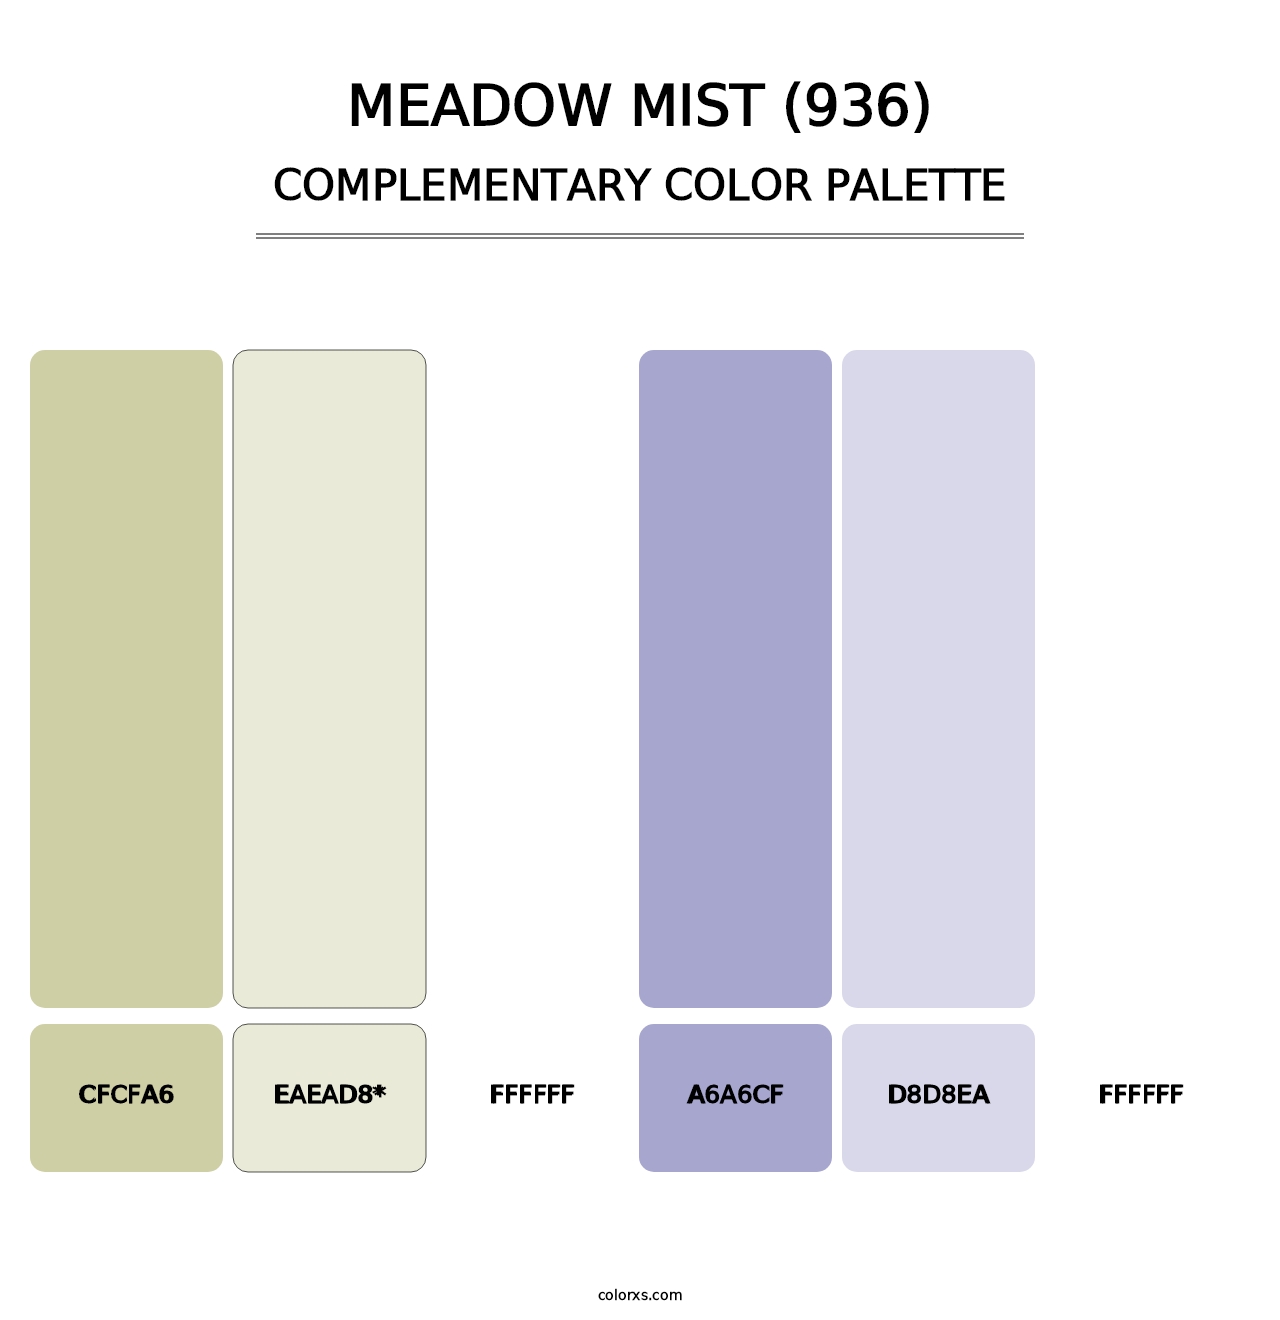 Meadow Mist (936) - Complementary Color Palette